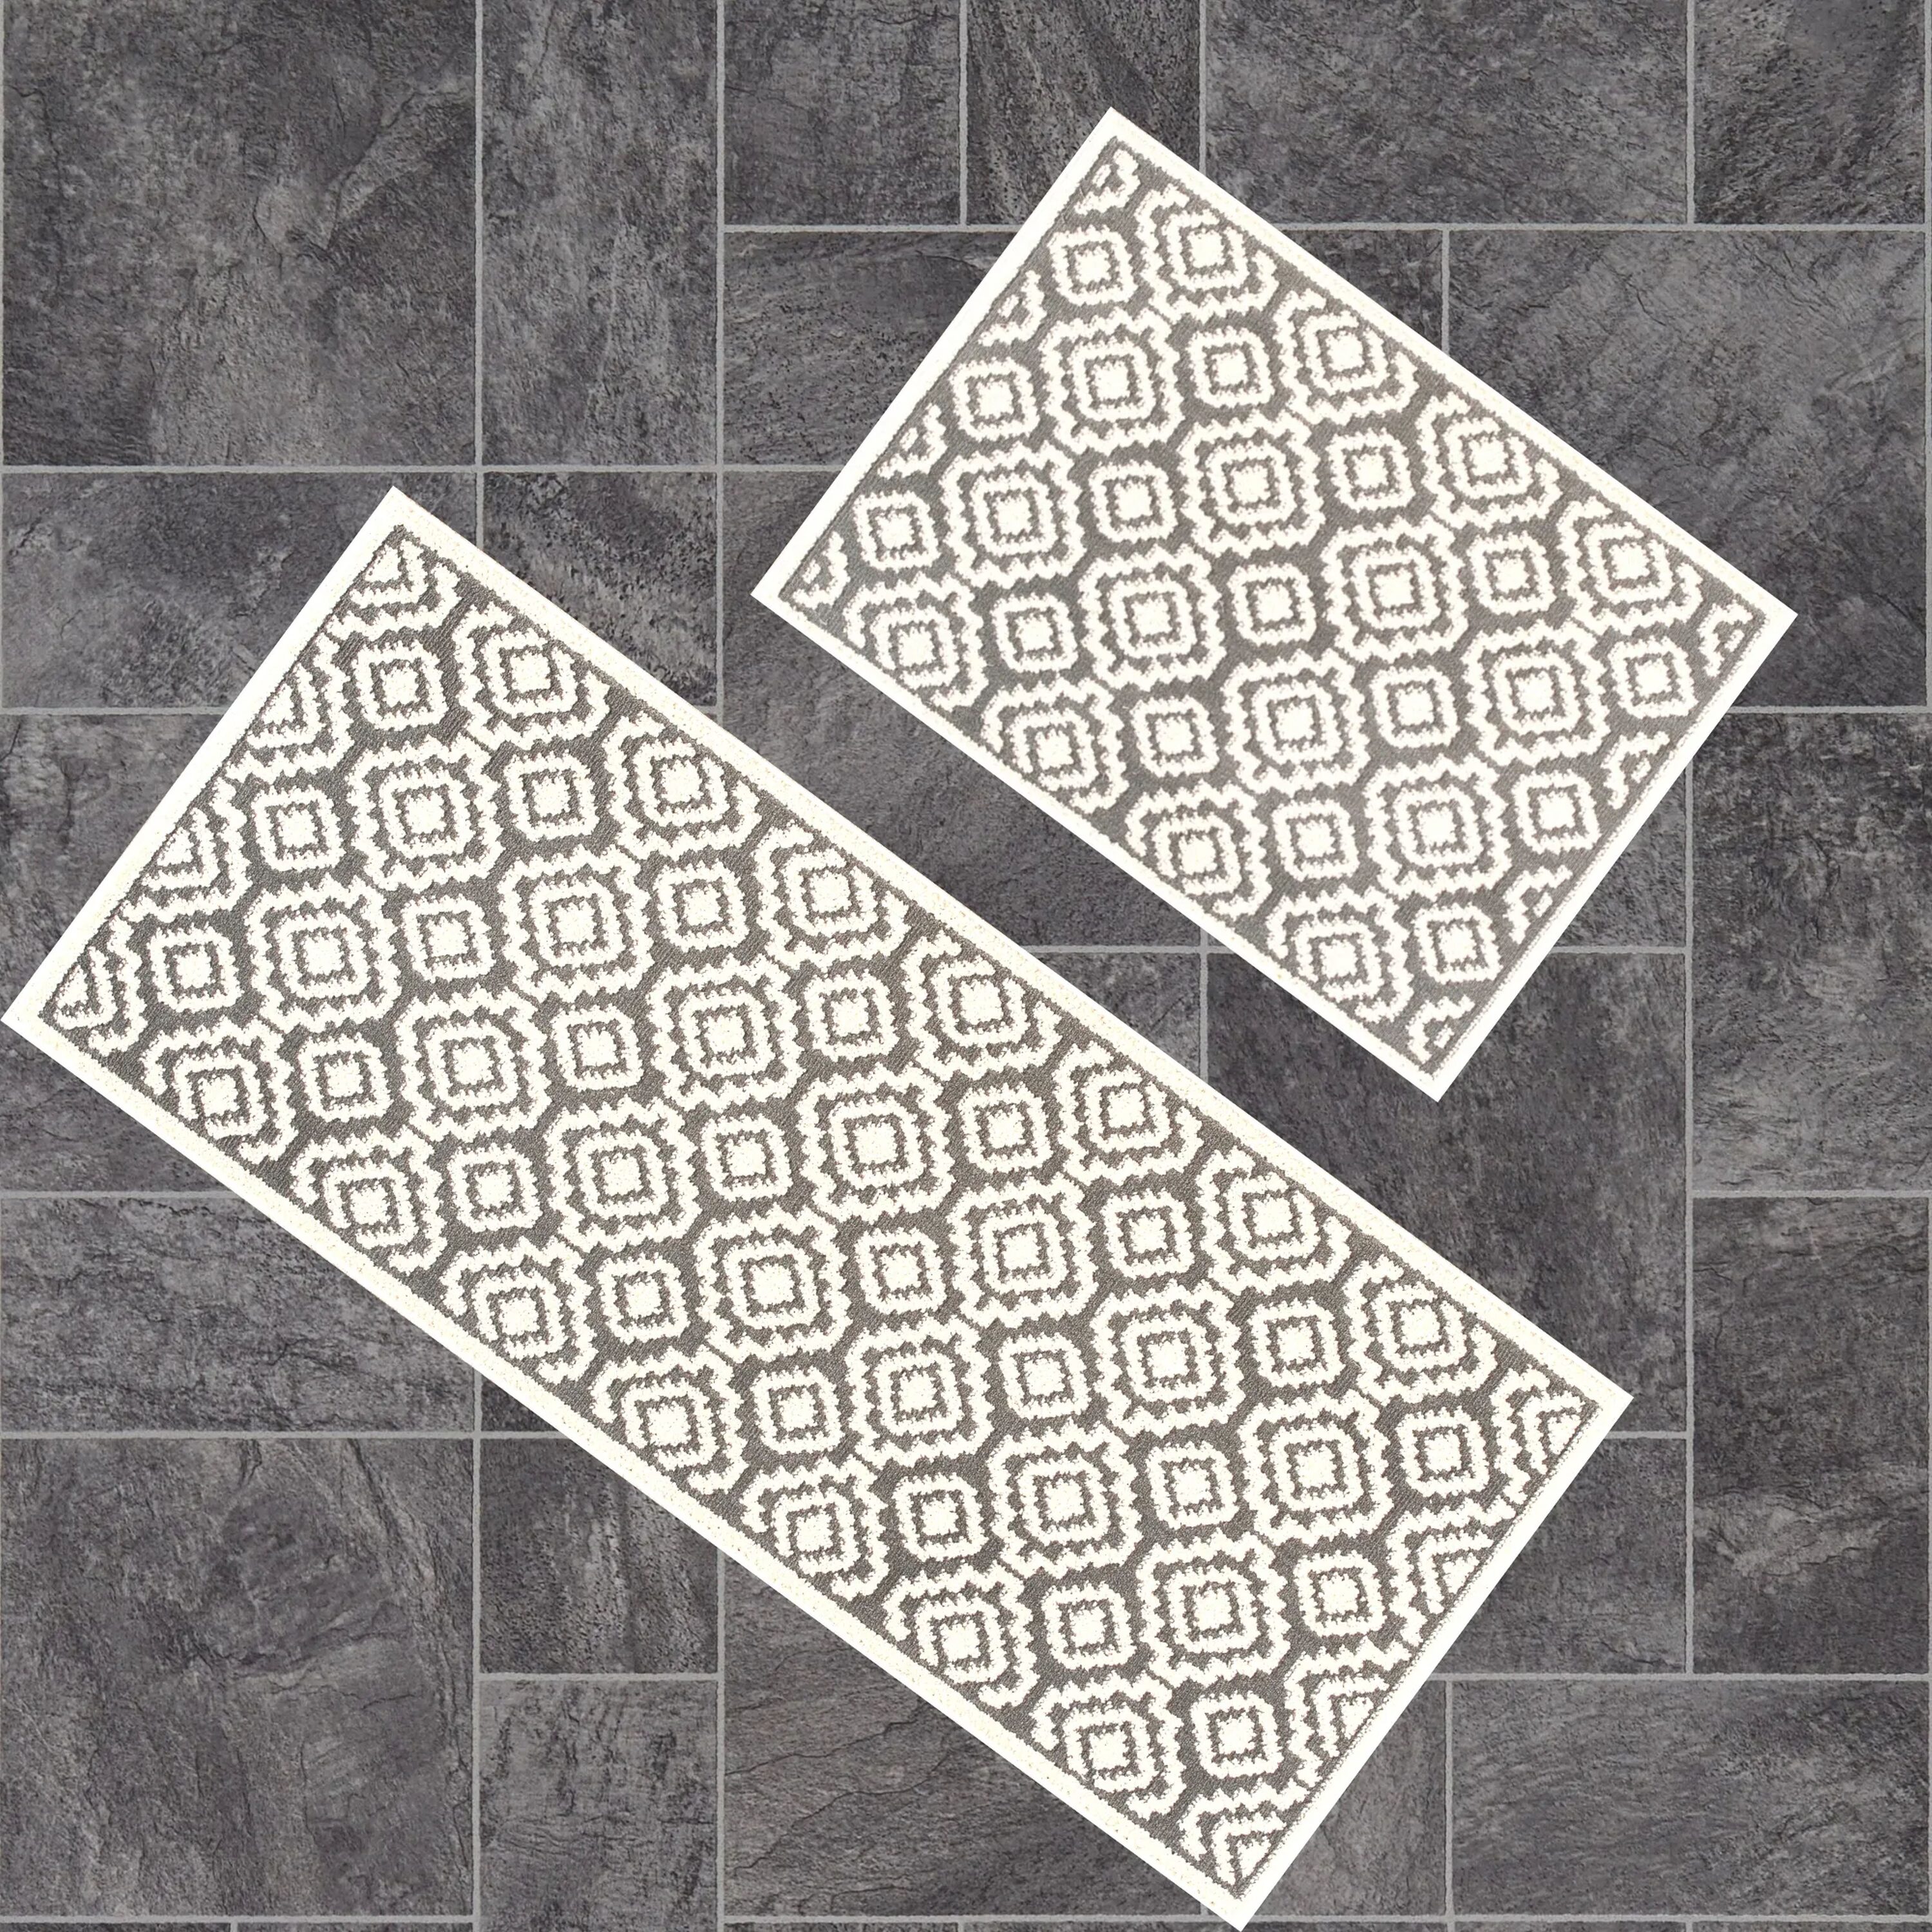 Sofihas 2 Piece Kitchen Rug Sets 59in x 24in x 35in x 24in Kitchen Floor Mats 100% Shag Polypropylene Farmhouse Washable Kitchen Rugs and Mats with